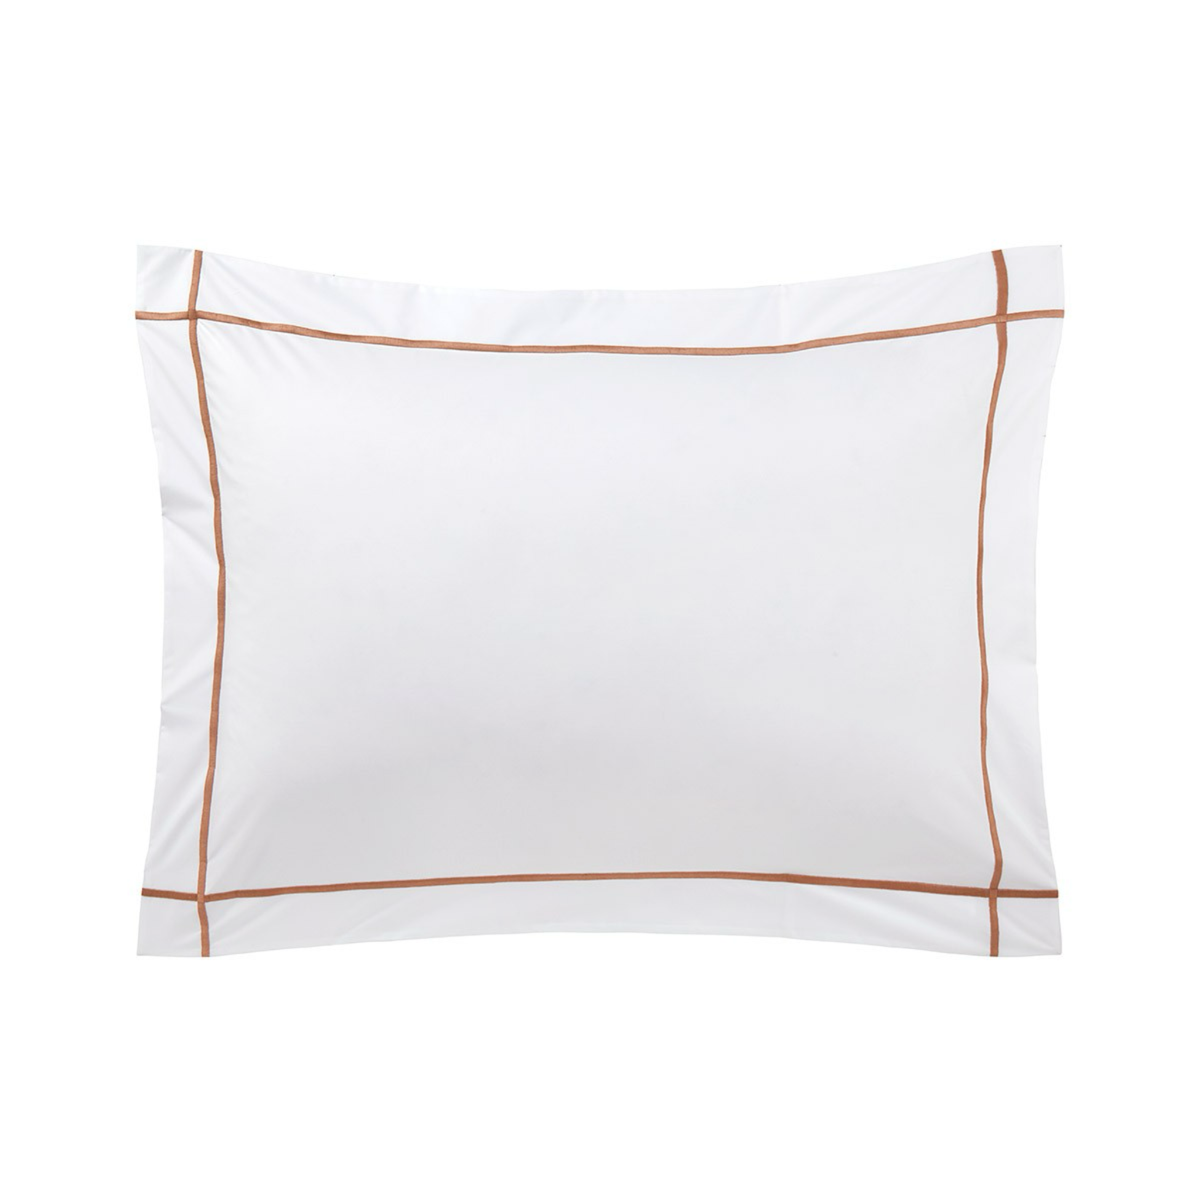 Sham of Yves Delorme Athena Bedding in Sienna Color